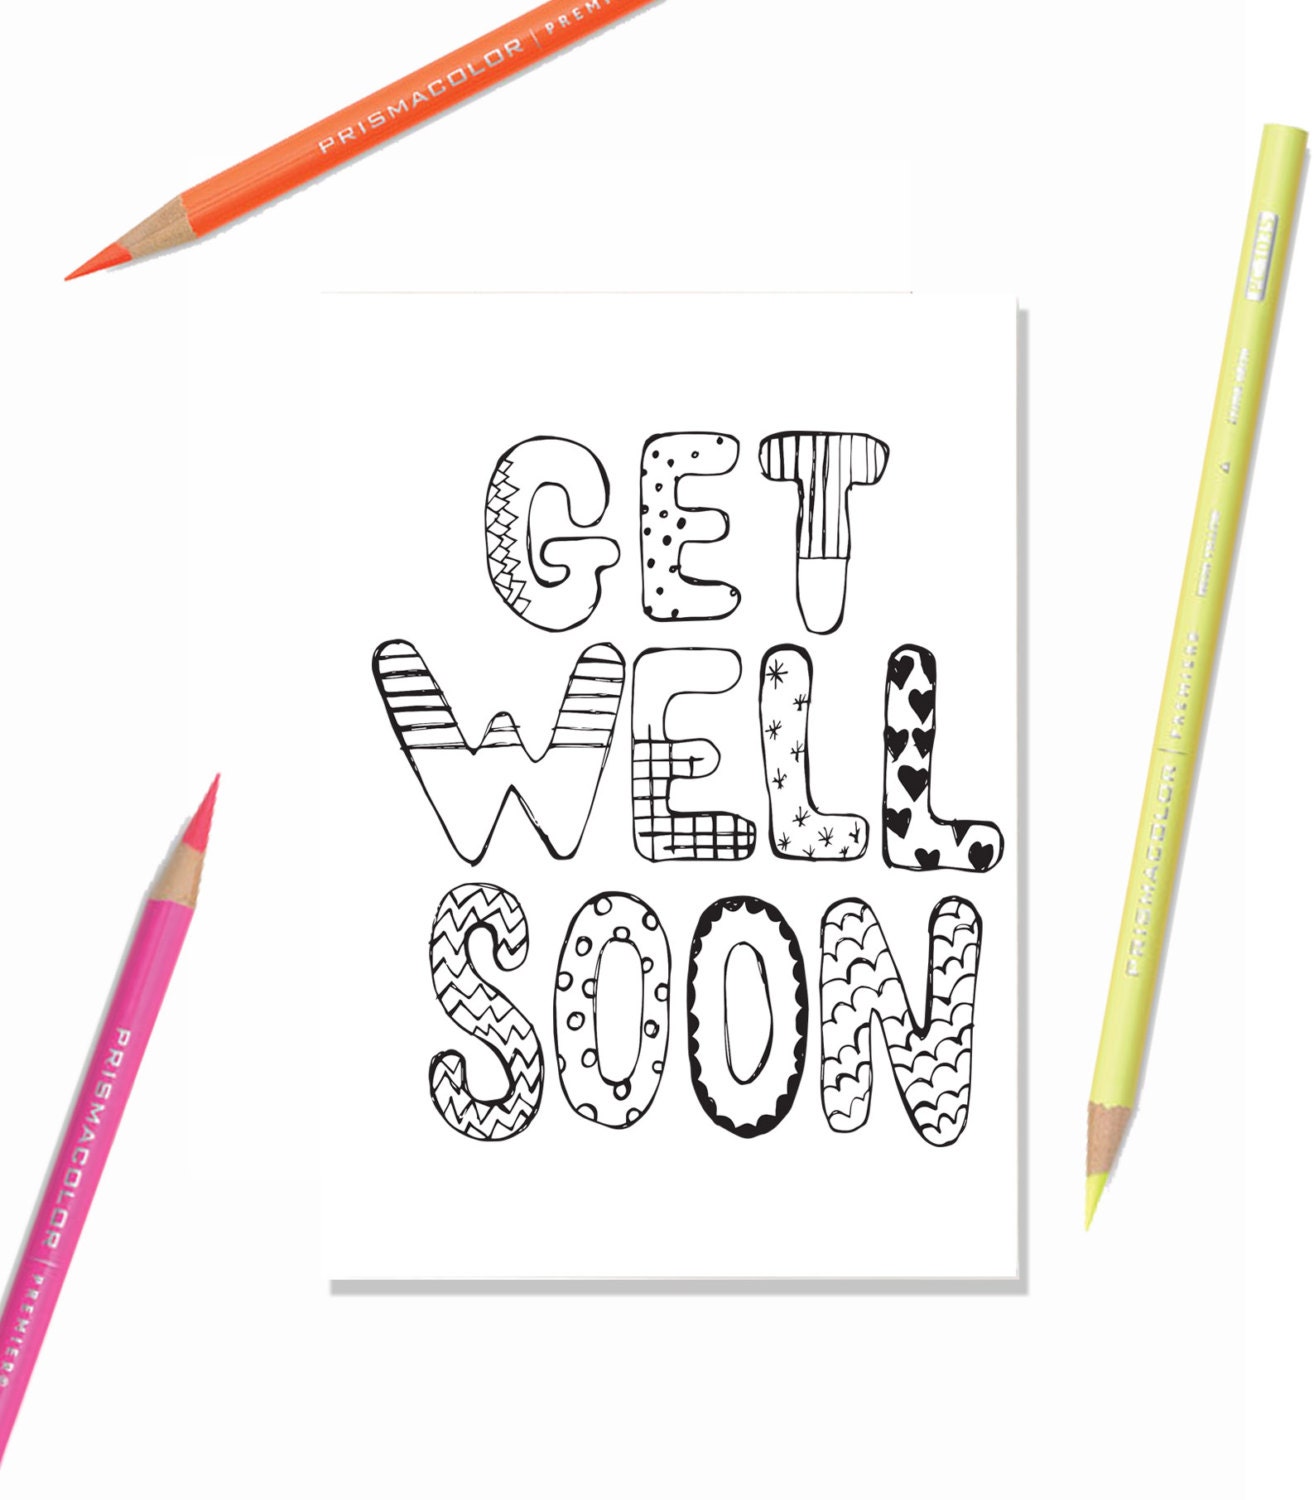 Printable Greeting Card "Get Well Soon", Kids Coloring Page, Line Art Ready  To Print, fashion illustration, Sympathy Card, Girls coloring Intended For Get Well Soon Card Template